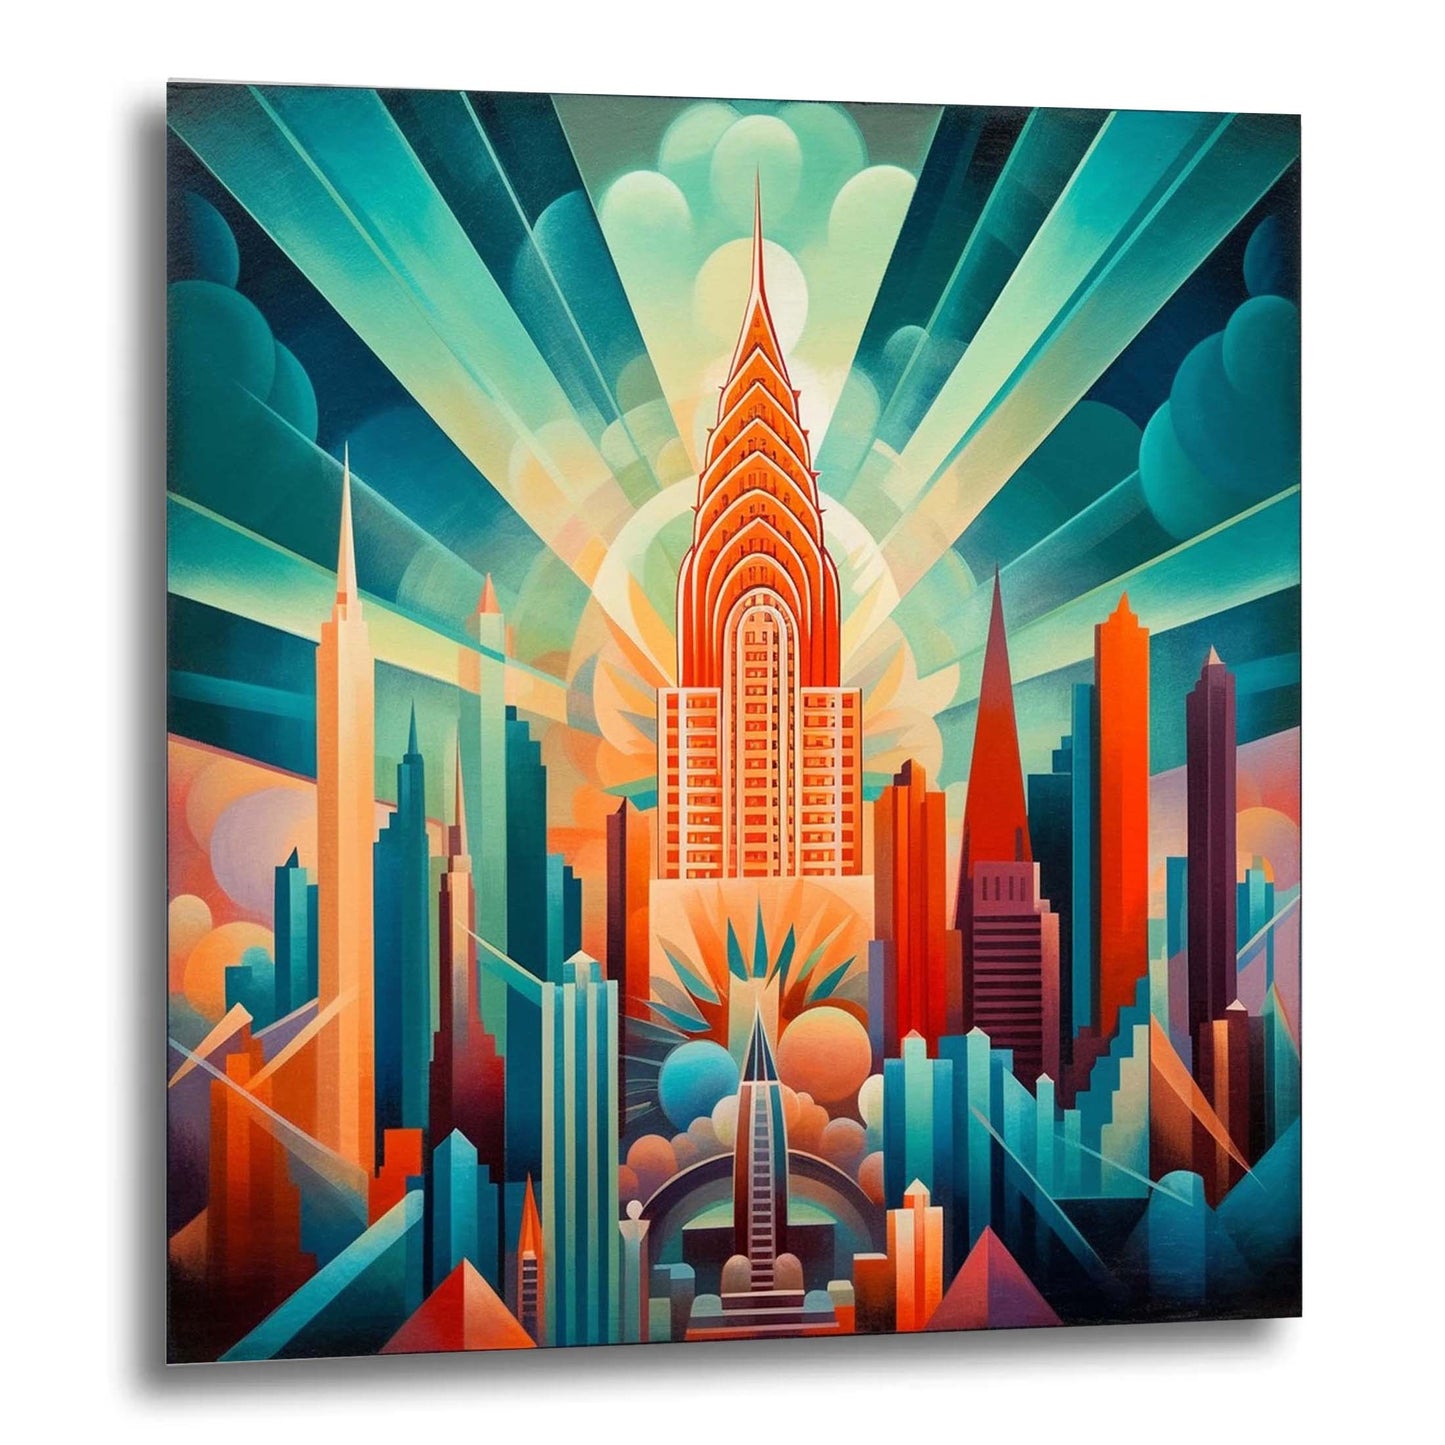 New York Chrysler Building - mural in the style of futurism